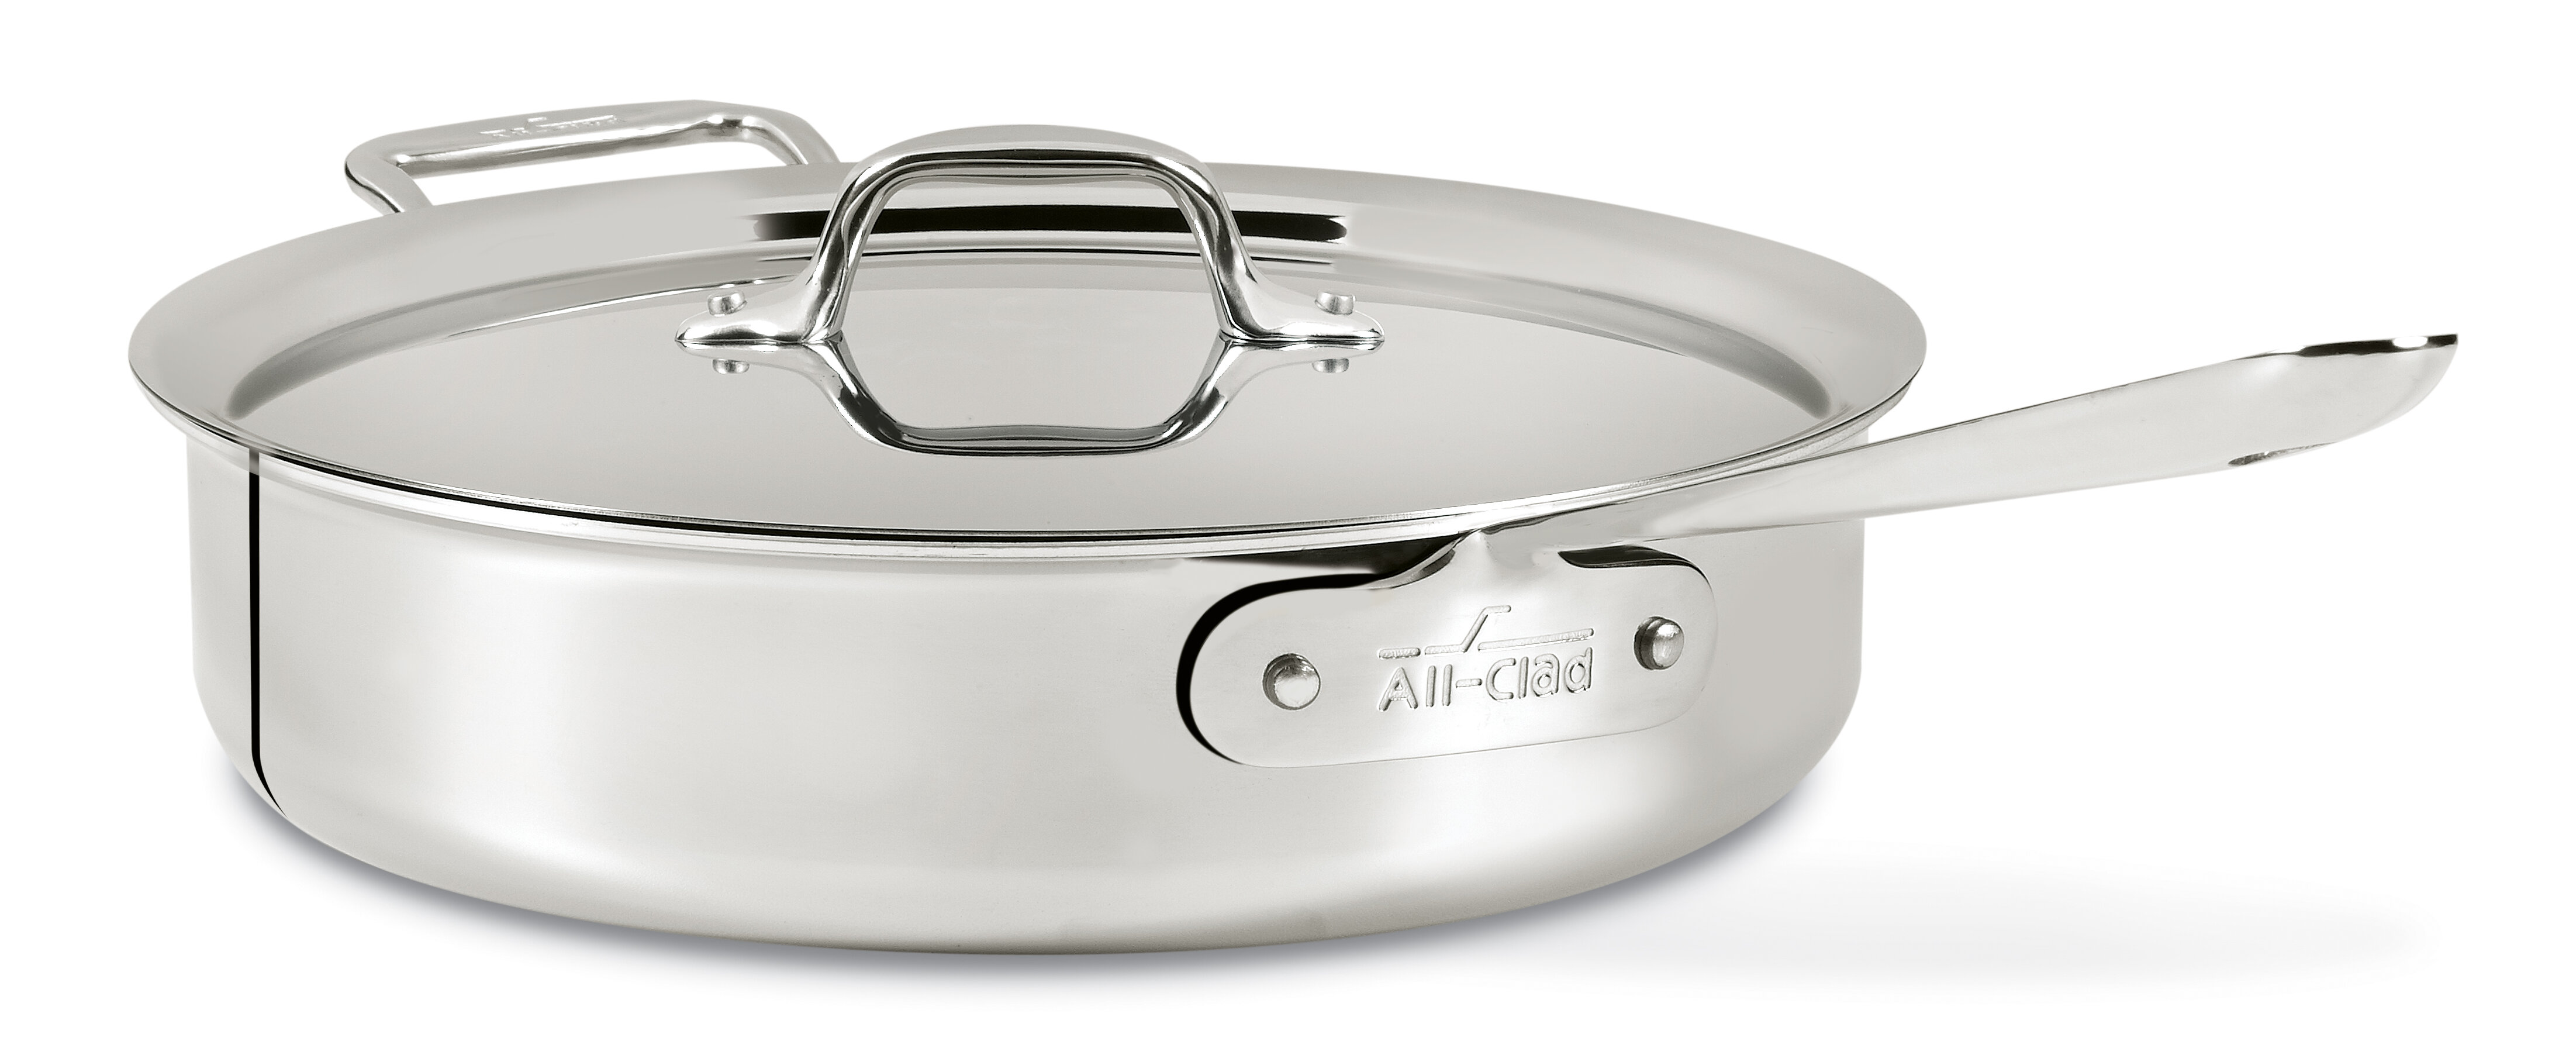 All-Clad - Stir Fry Pan D3 14, Stainless Steel